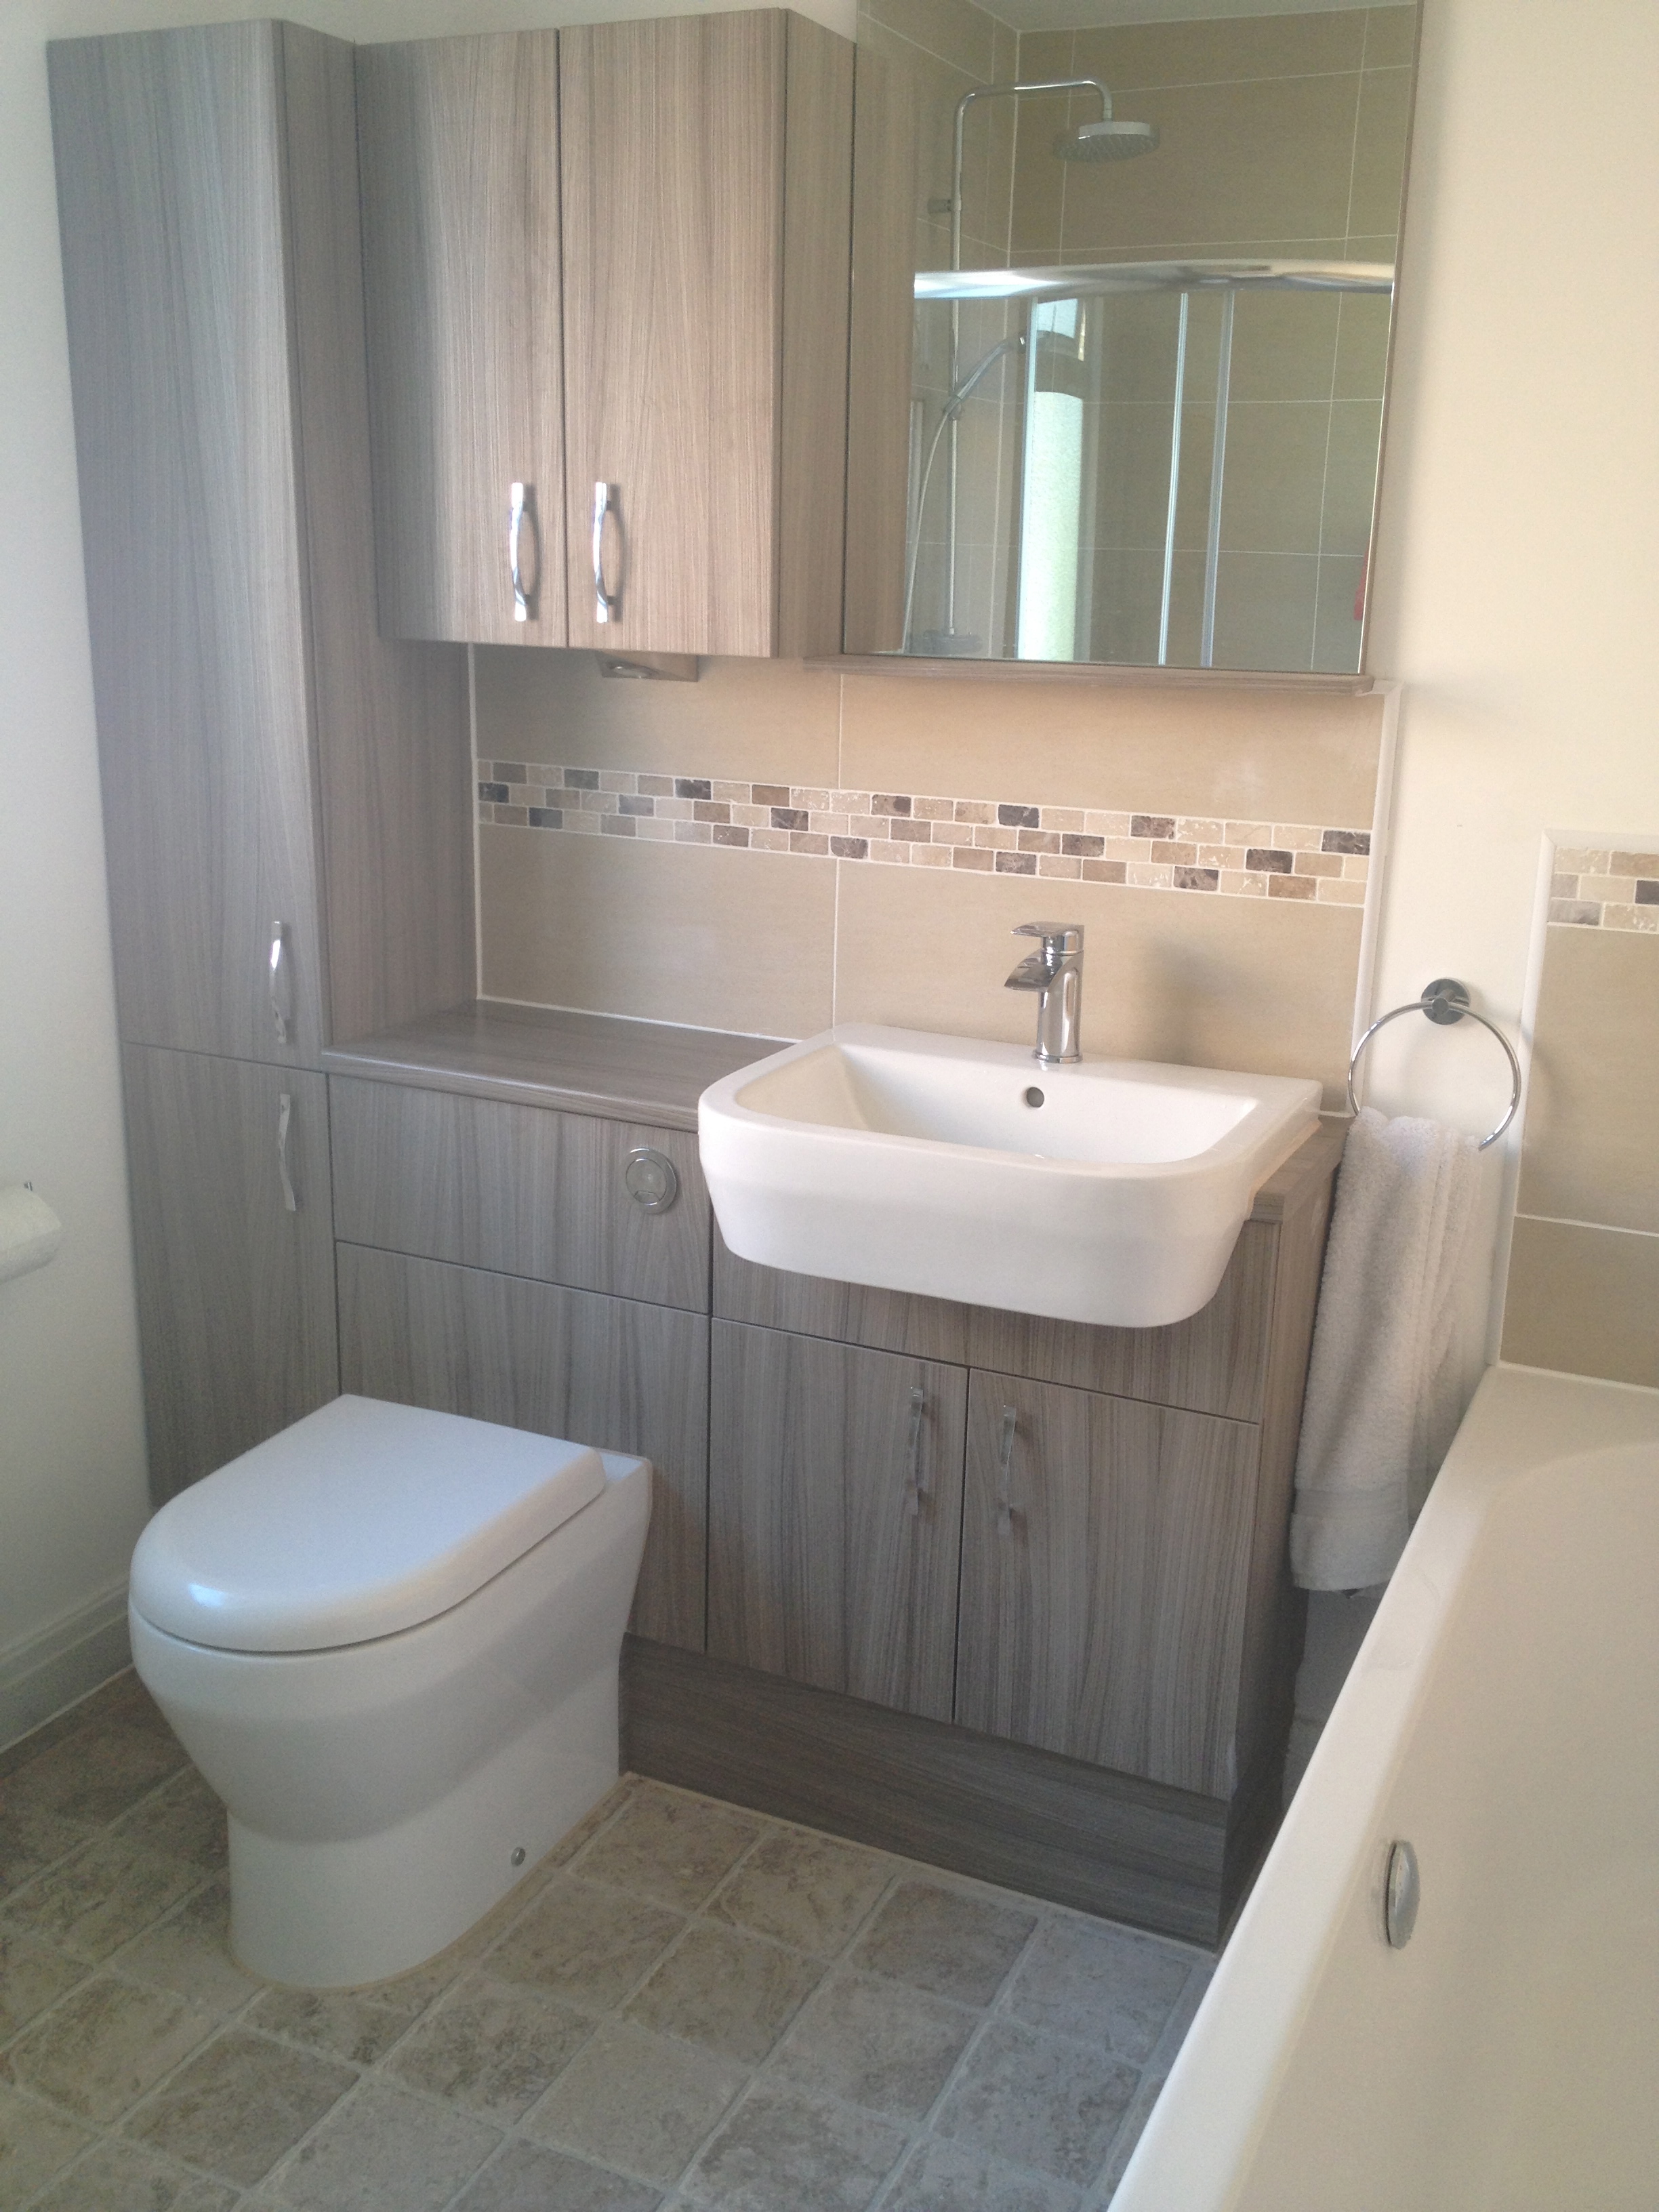 Bathroom Costs Uk Guru, How Much Does It Cost To Replace A Small Bathroom Uk